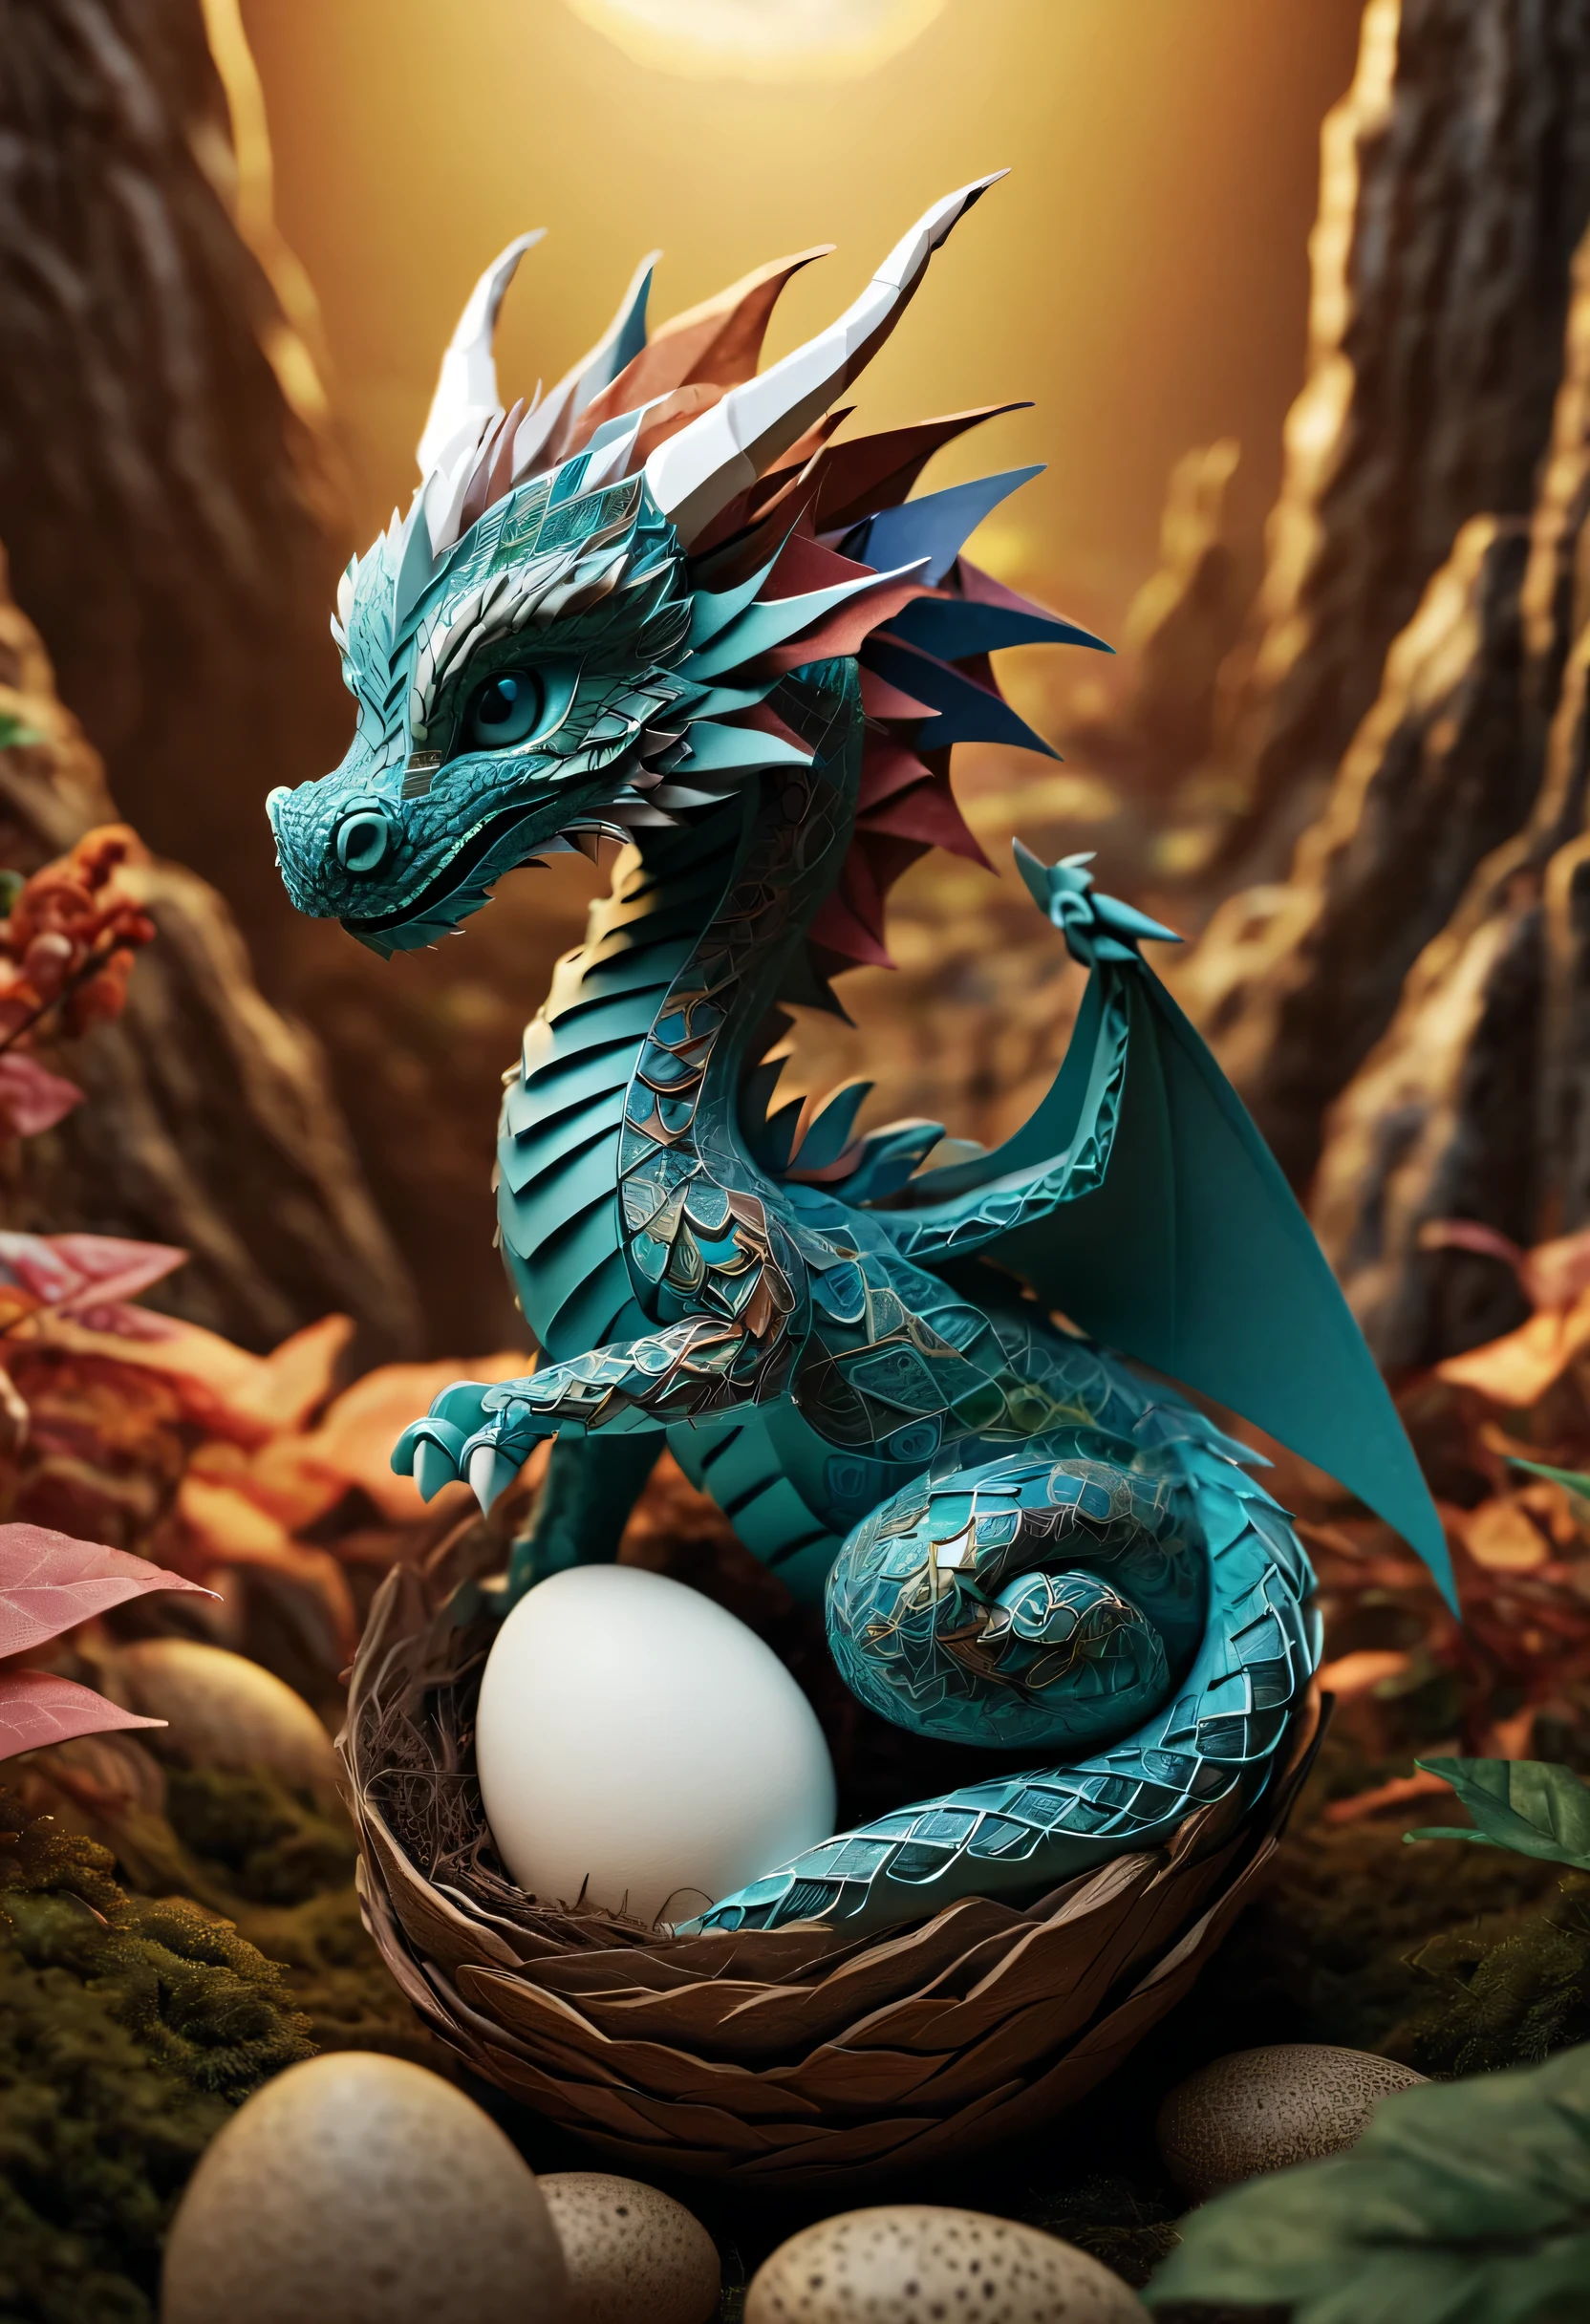 In a nest of Chinese dragons, a mini baby dragon emerges from a cracked egg, in the midst of its discovery of the world. The dragon's mother stands nearby, radiating pride in her newly hatched offspring. The scene is adorned with intricate zentangle patterns, resembling delicate ink art. The dragon and its surroundings feature origami elements, adding a touch of paper-folding craftsmanship. The composition invokes a cinematic quality, as if frozen within a pivotal moment of a grand adventure. The imagery portrays a range of emotions, capturing the awe and wonder of the dragon's first steps in the world. The colors are vibrant and vivid, adding a sense of dynamic energy to the scene. The lighting casts a soft glow, highlighting the dragon's features and creating a magical atmosphere. Staying true to the best quality, the artwork is of high resolution (4k, 8k), resulting in ultra-detailed visuals. The style blends realistic and photorealistic qualities, lending a lifelike presence to the dragons and their environment.